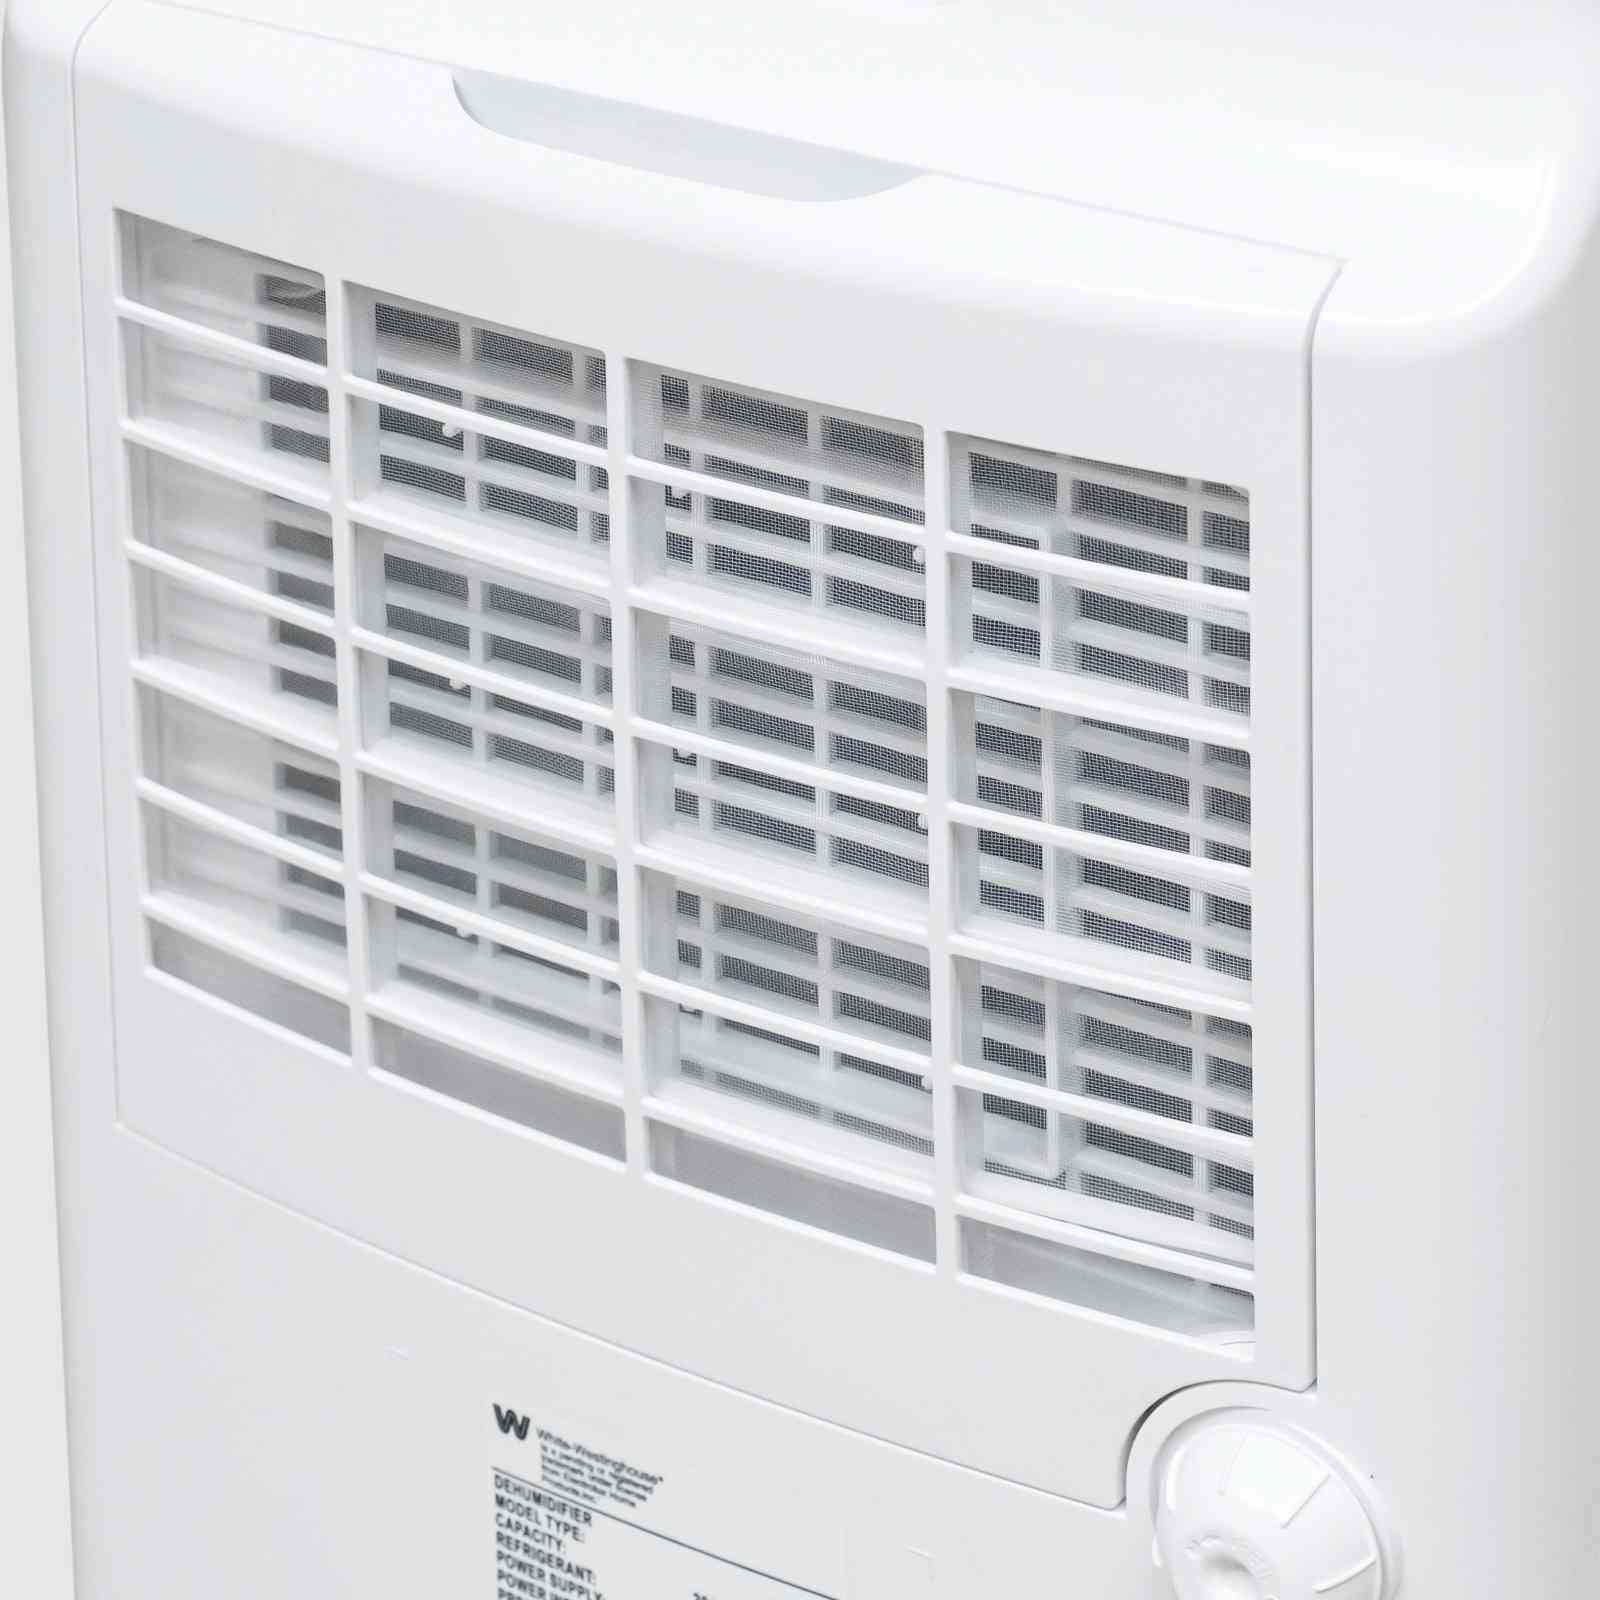 Close-up view of the rear vent and control knob on the White Westinghouse Dehumidifier AWHD20L, highlighting the efficient airflow design. The white body includes labels with safety and operational information, suitable for maintaining optimal humidity levels in residential and commercial spaces.